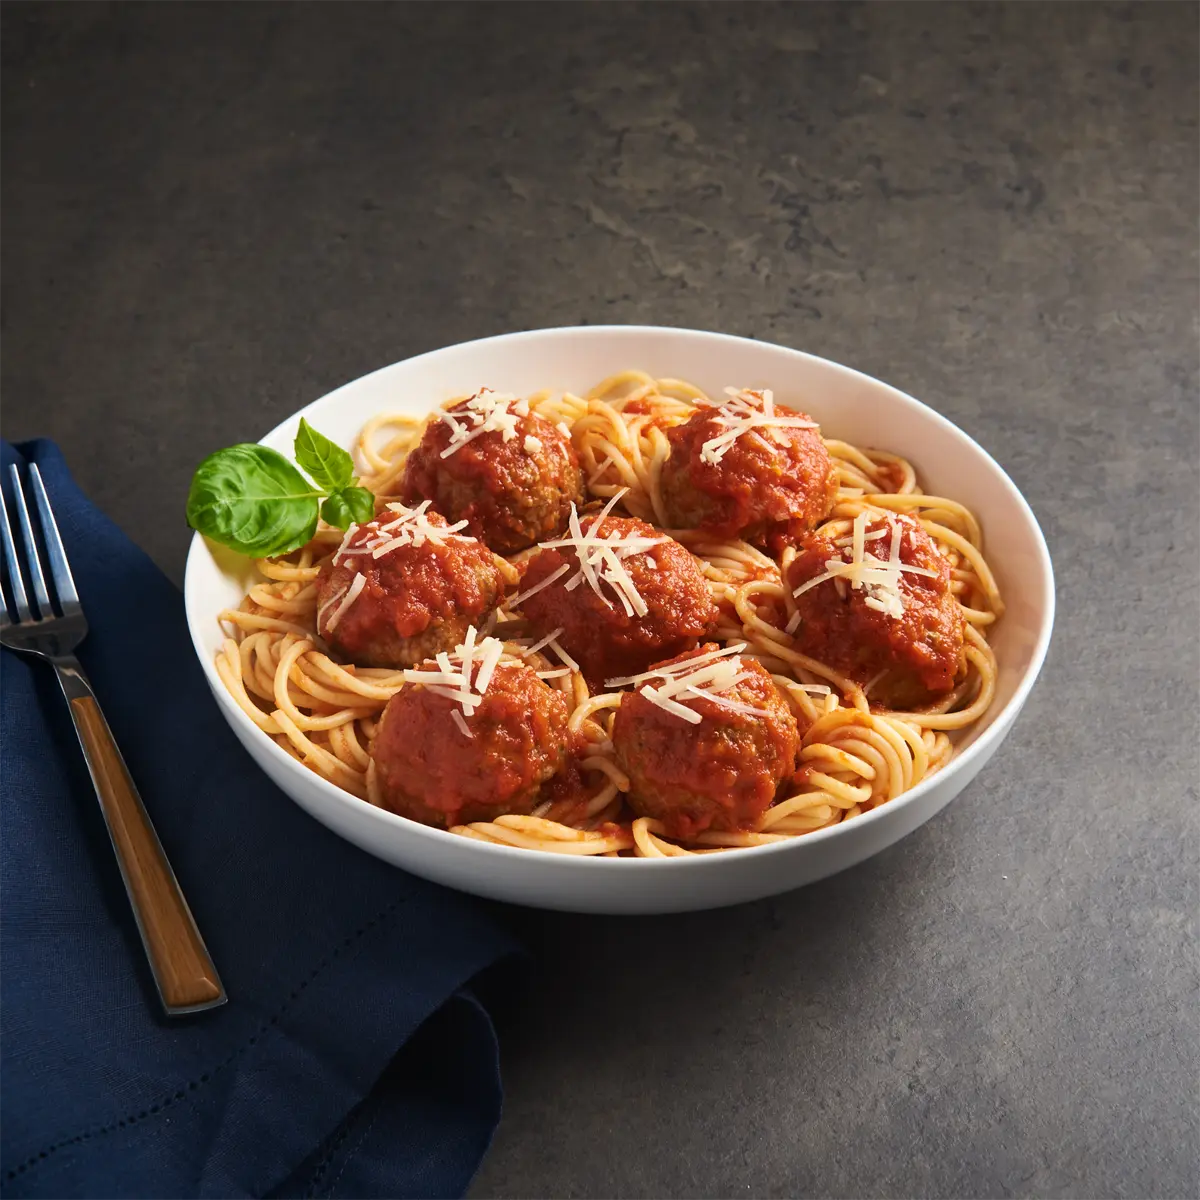 Beef Meatballs in Italian Style Sauce (6 1lb Family Meals)